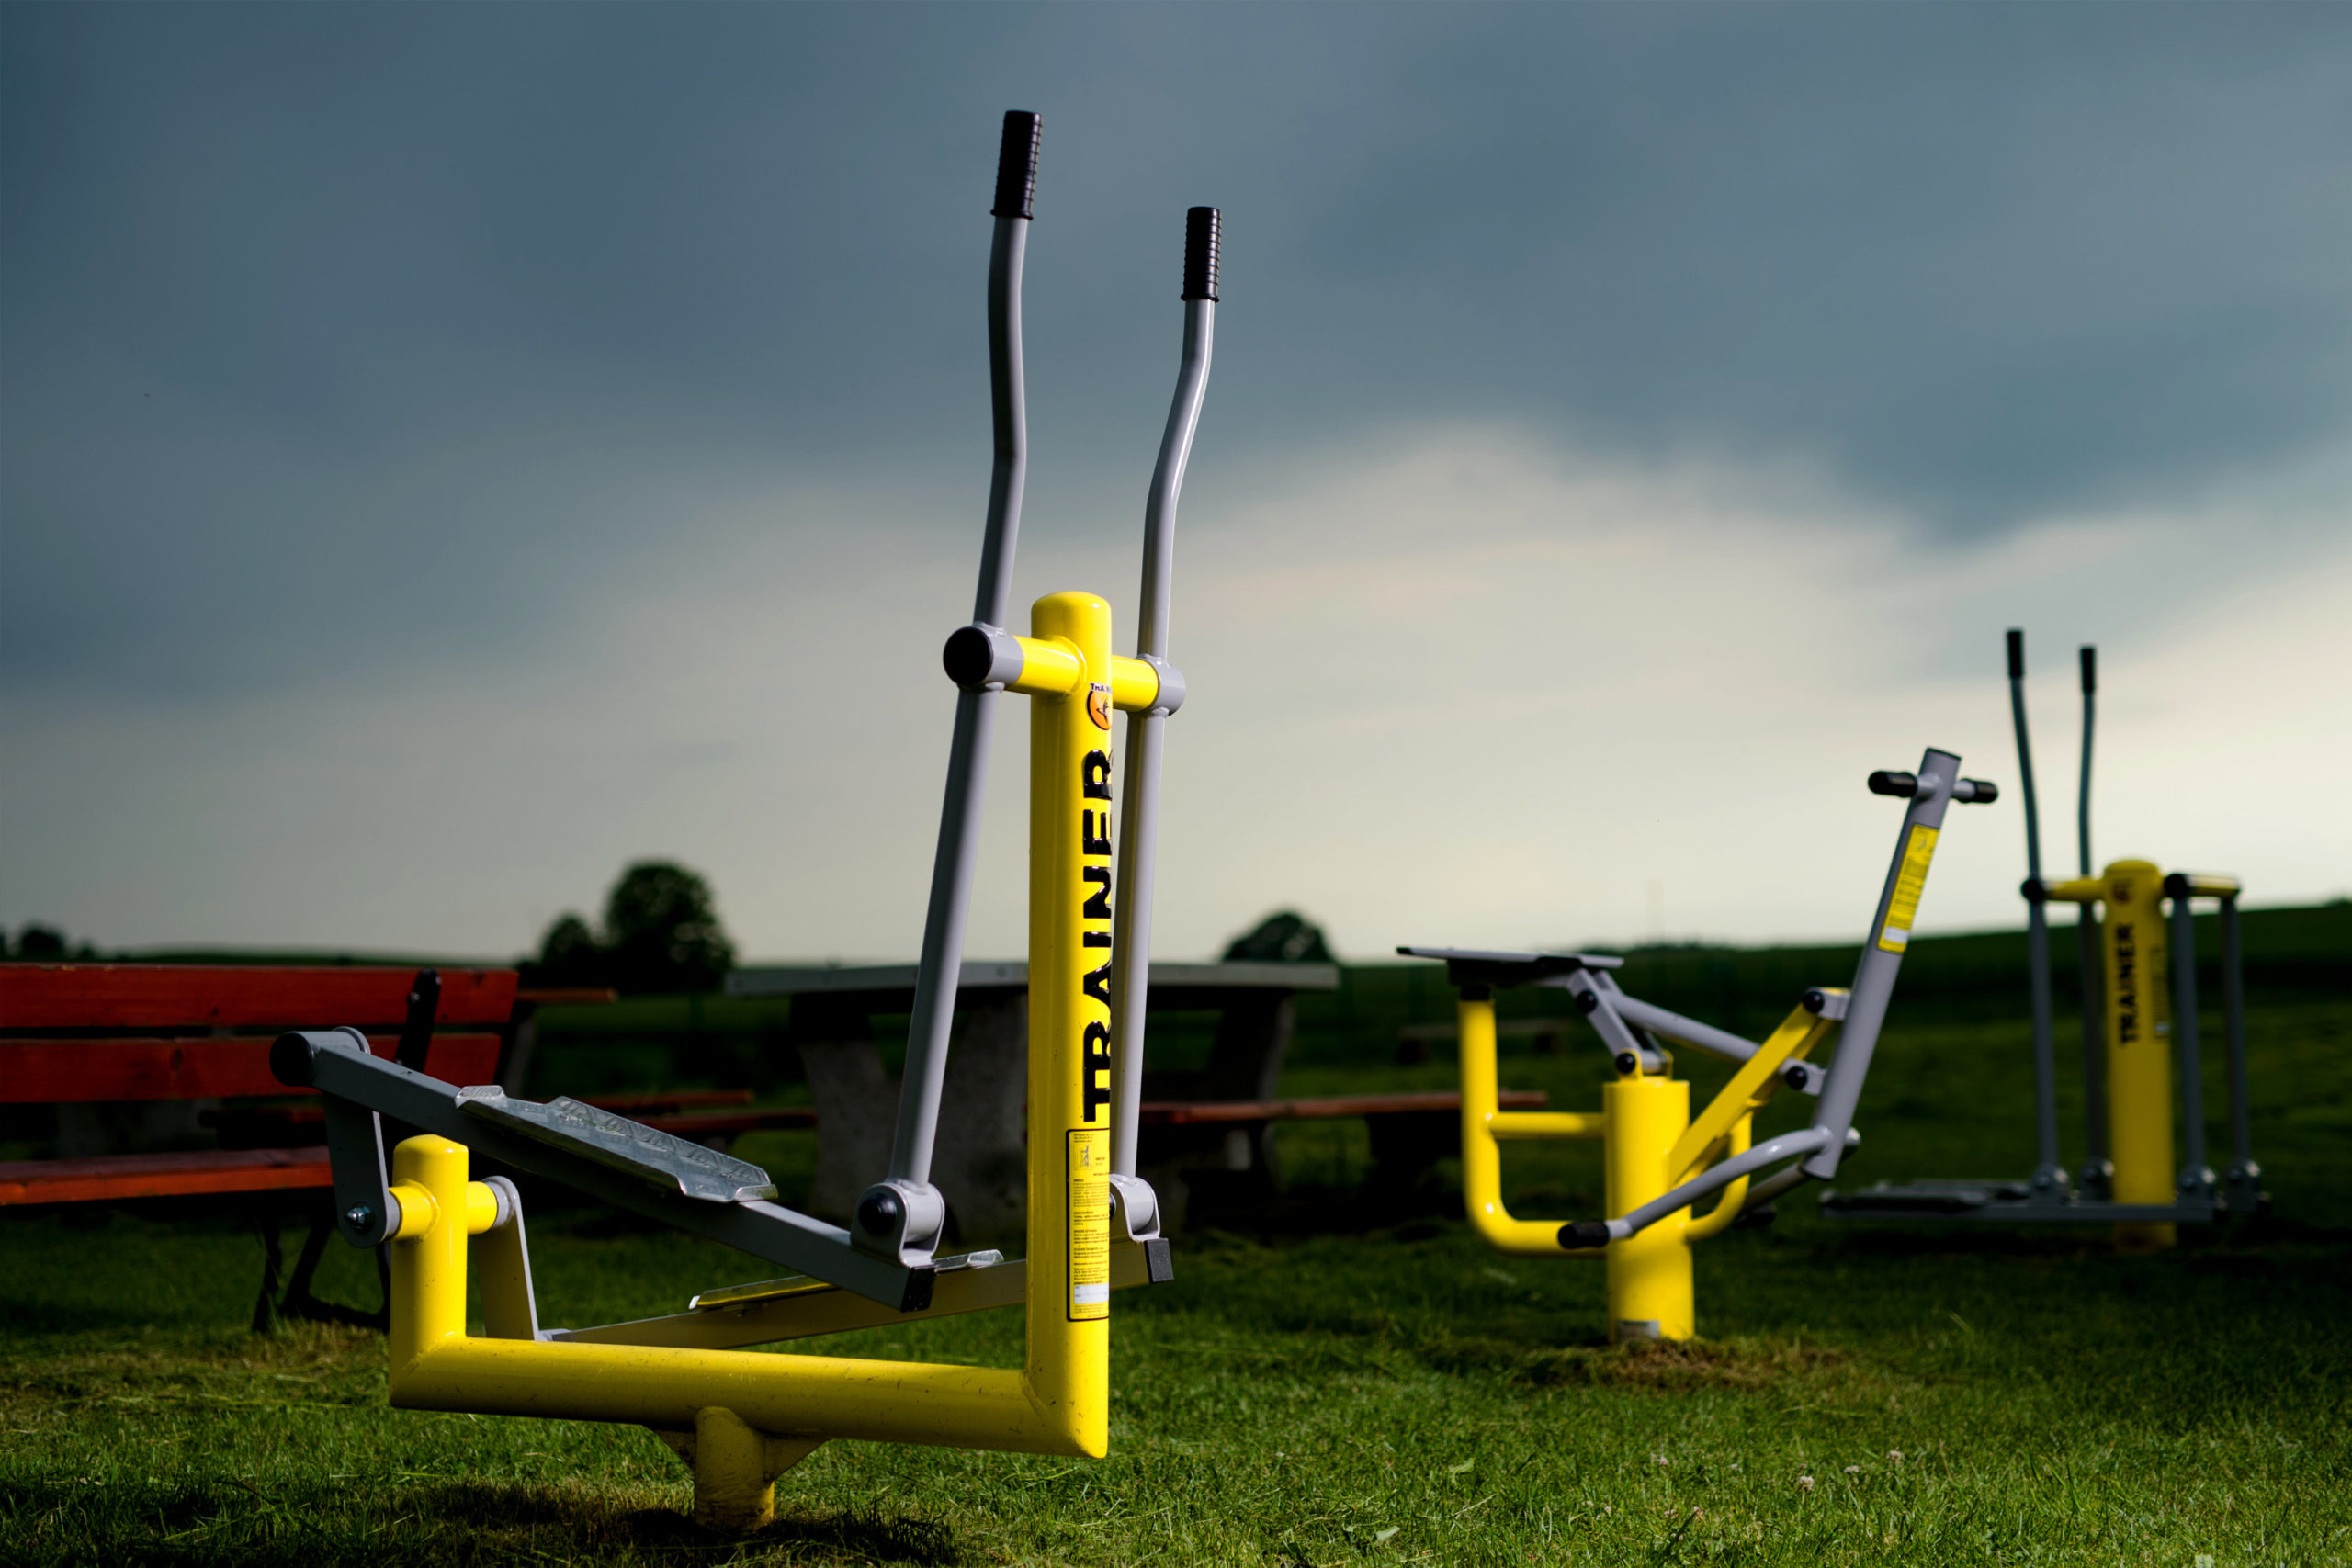 Outdoor gym equipment for companies